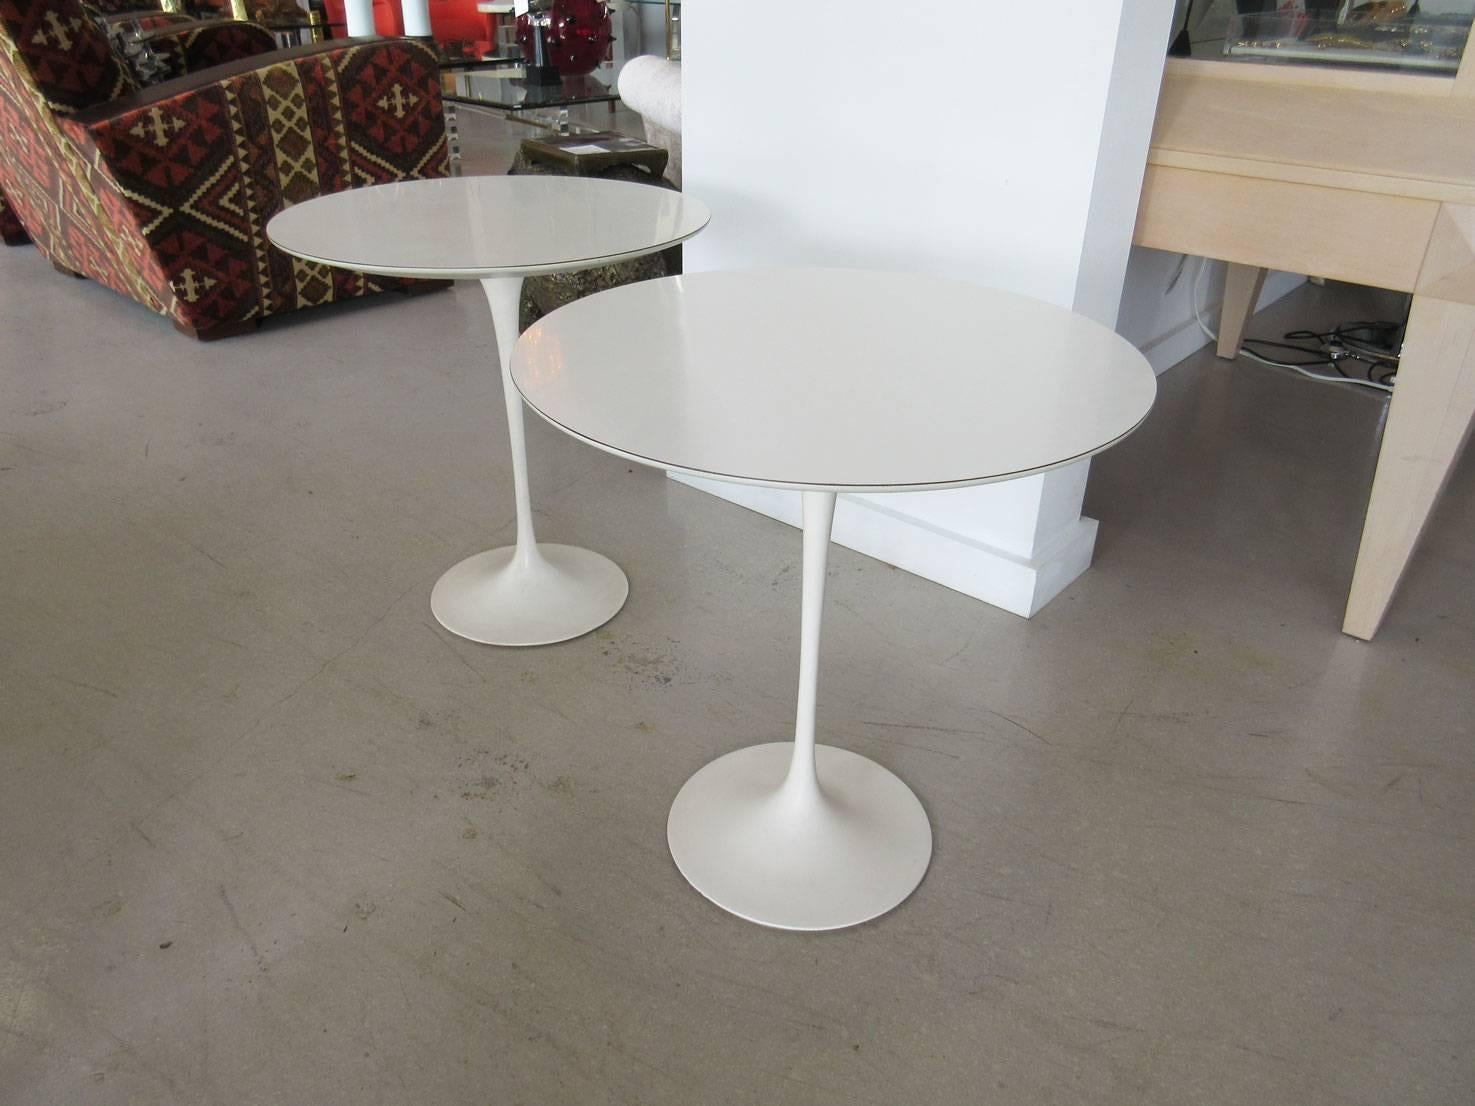 Pair of original Knoll tulip tables with circular tops designed by Saarinen. The tables have original labels on verso.